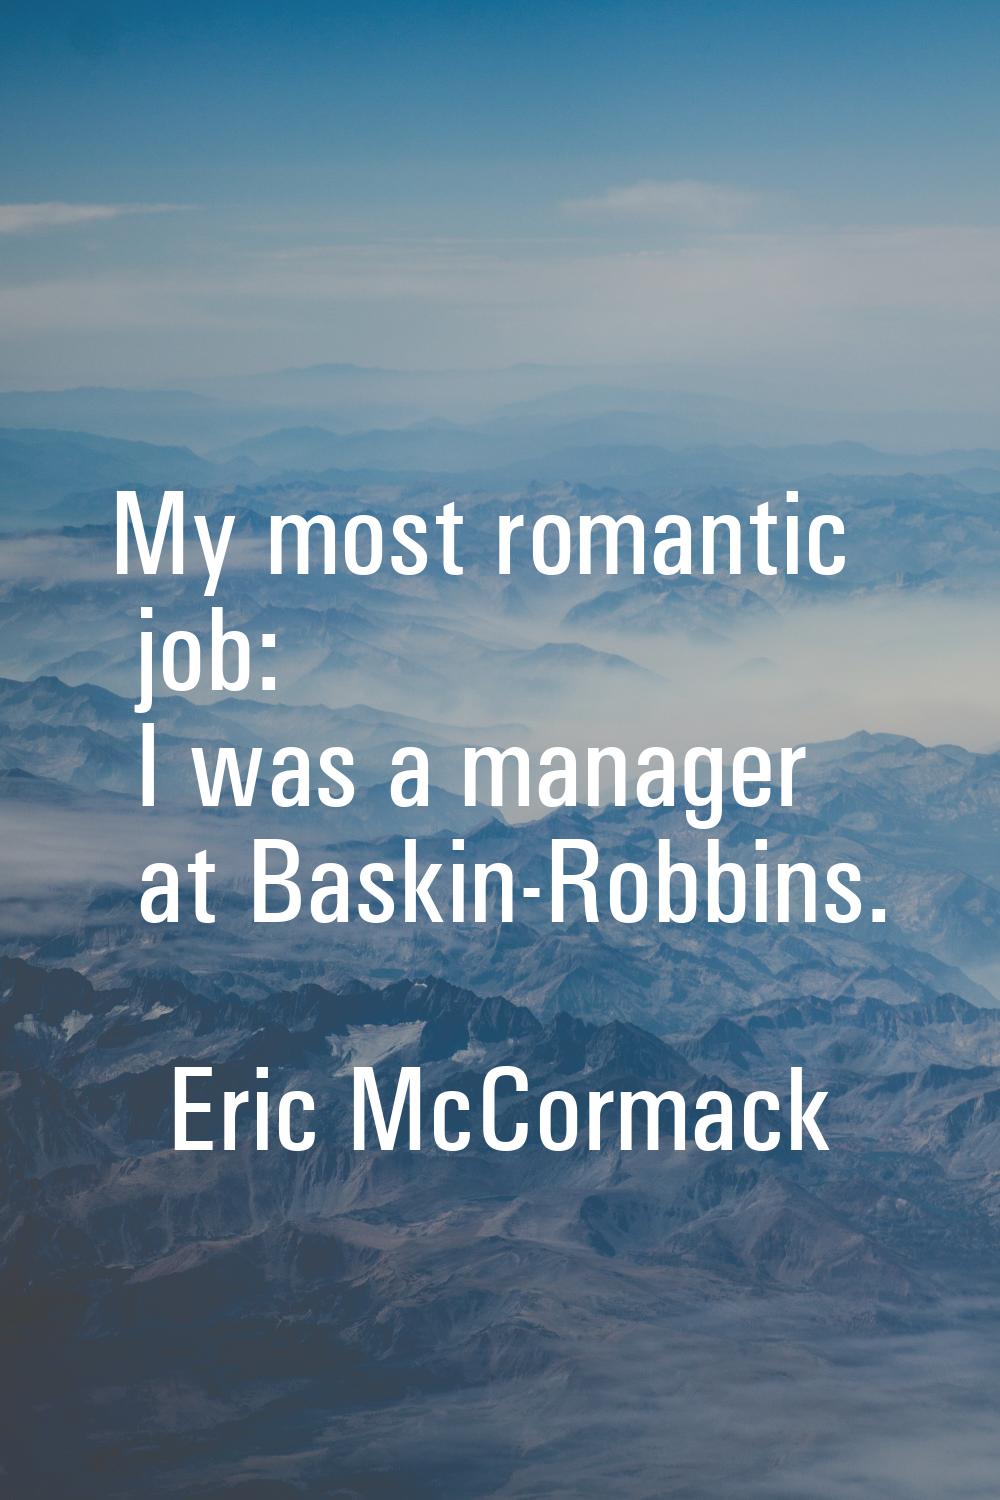 My most romantic job: I was a manager at Baskin-Robbins.